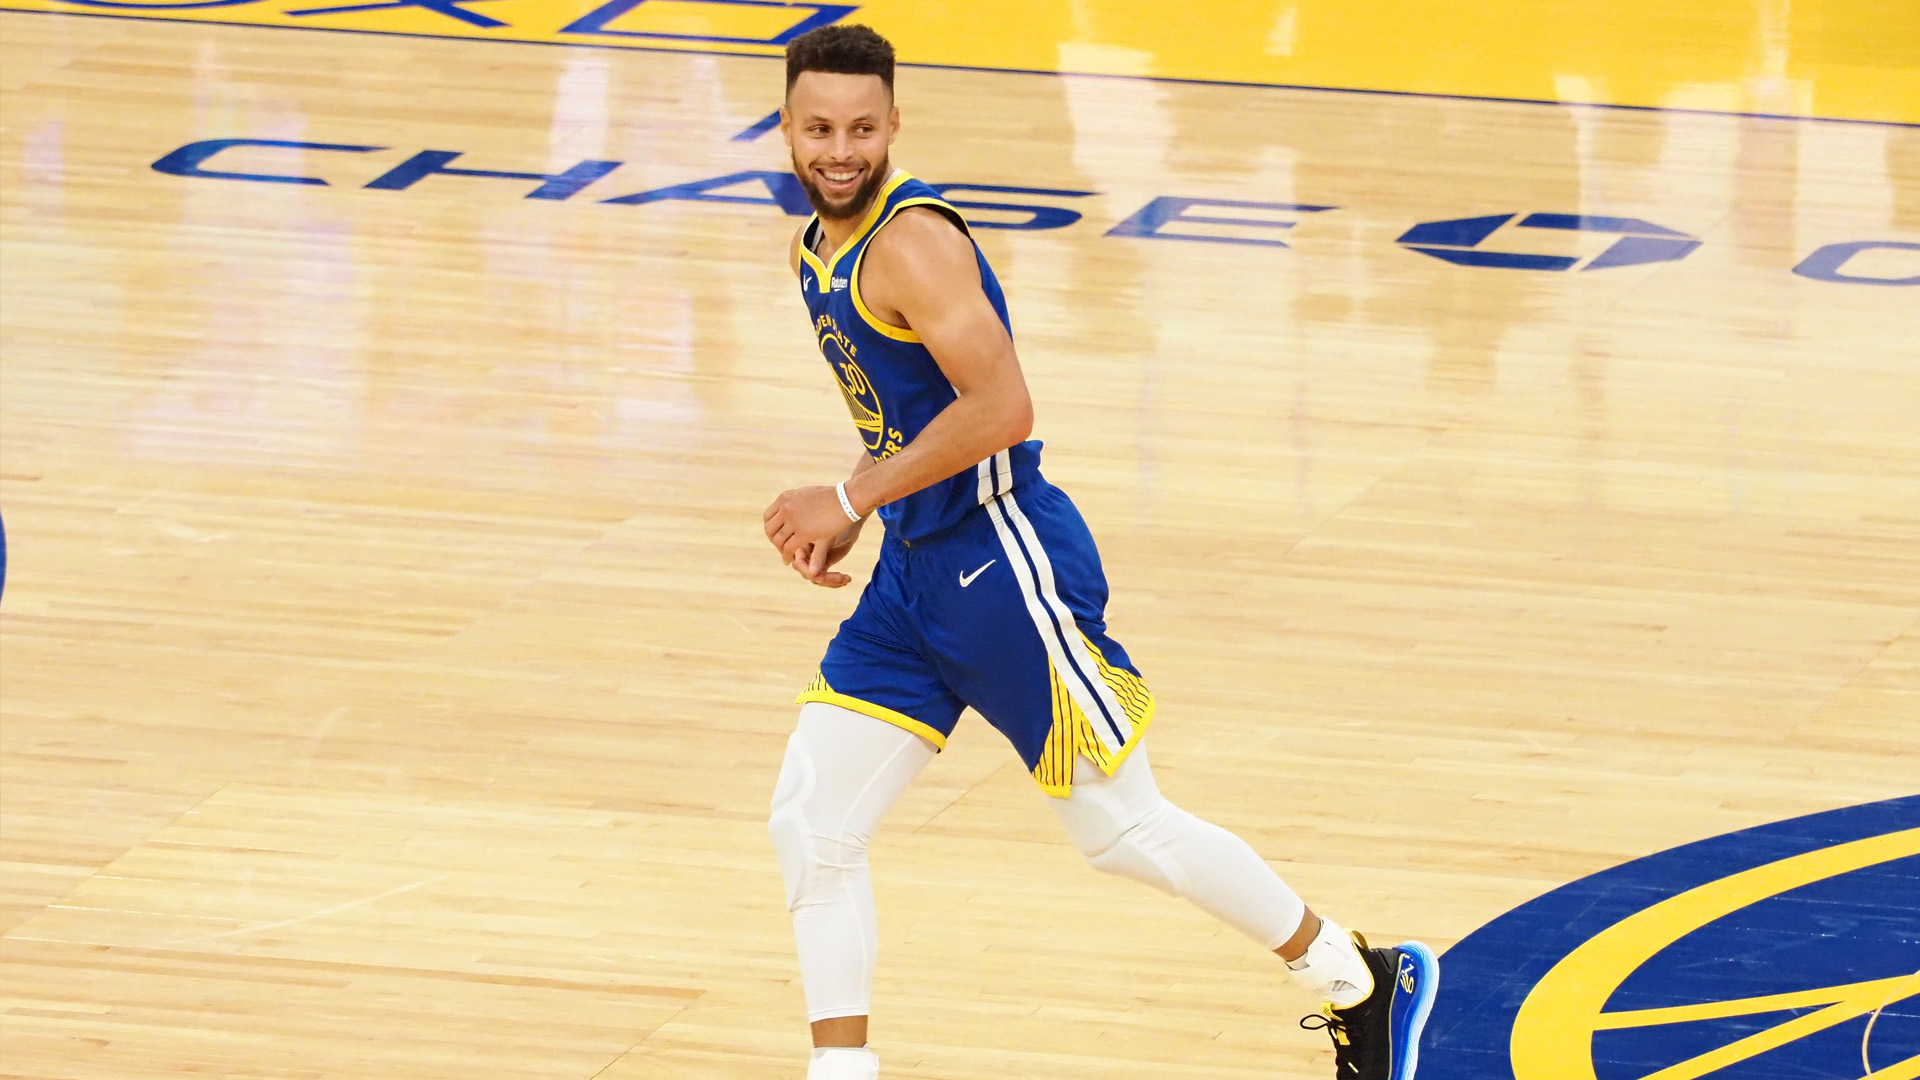 Steph Curry of the Warriors is the most trolled player on the NBA’s Twitter, the study shows